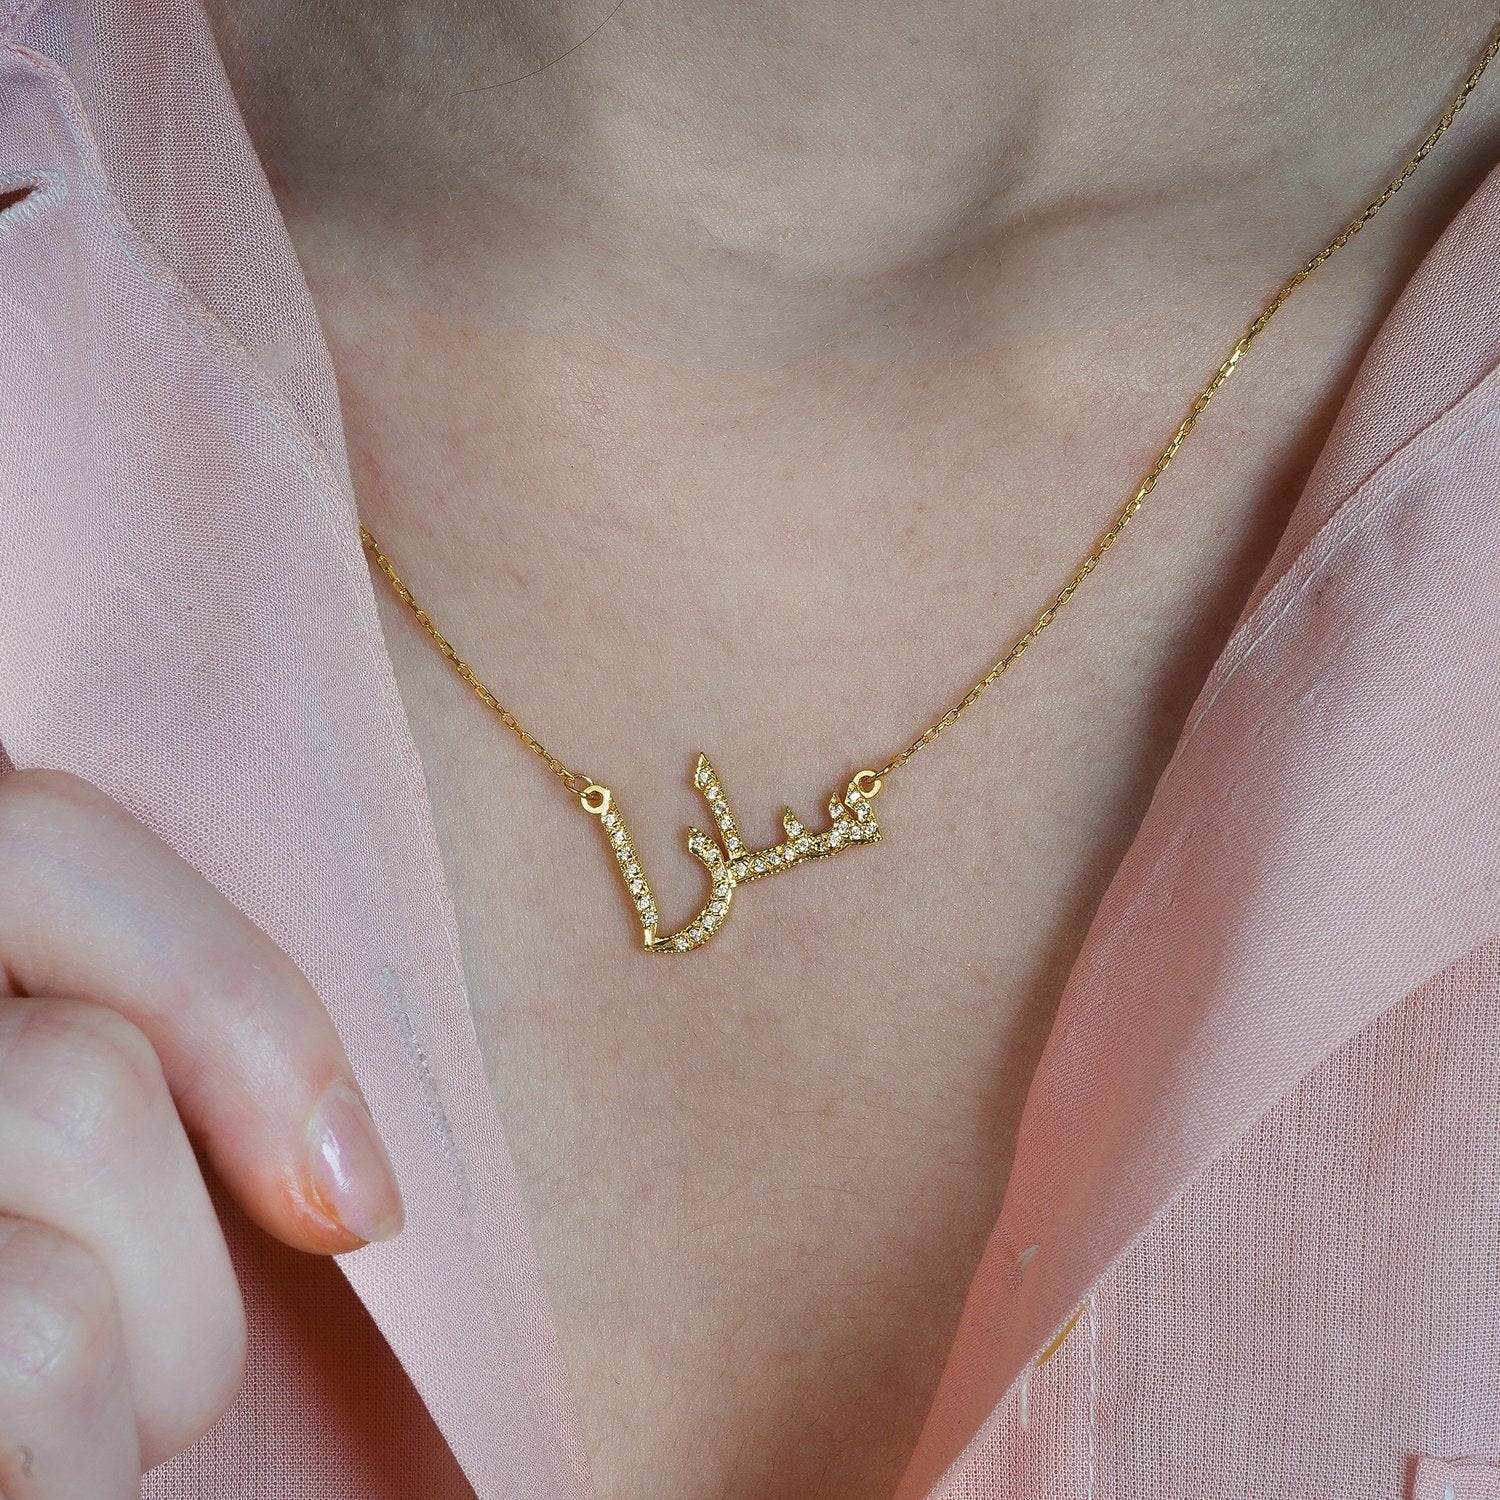 Personalised Arabic Name Necklace with Crystals